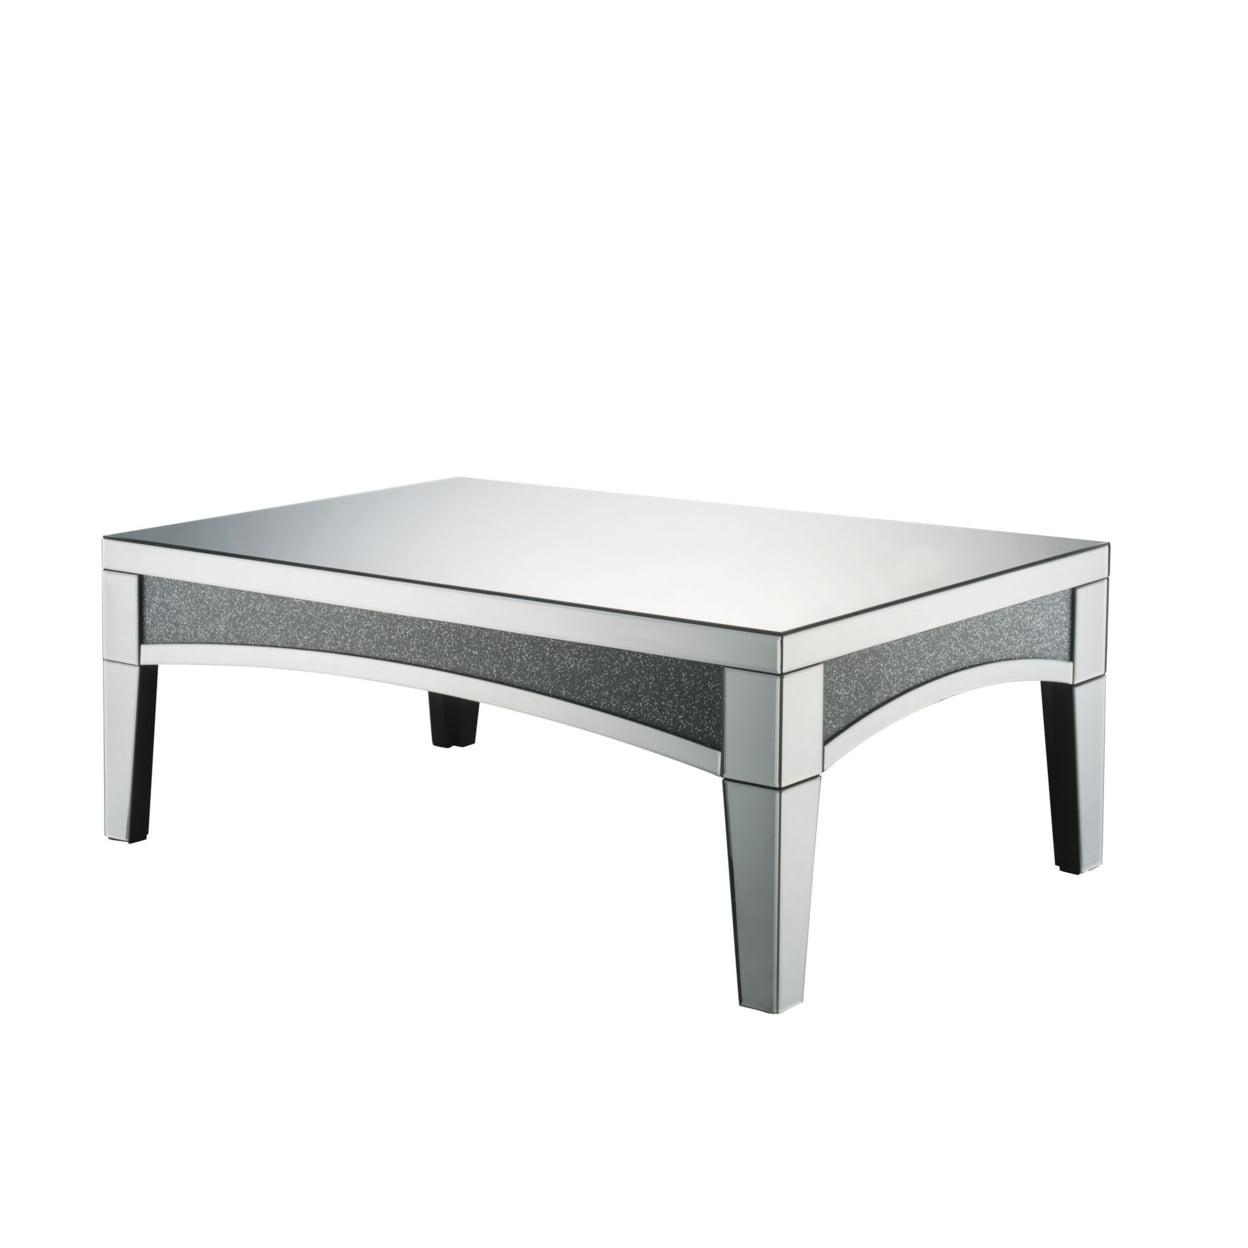 Exquisite Rectangular Coffee Table with Mirrored Trim and Faux Stone Inlays